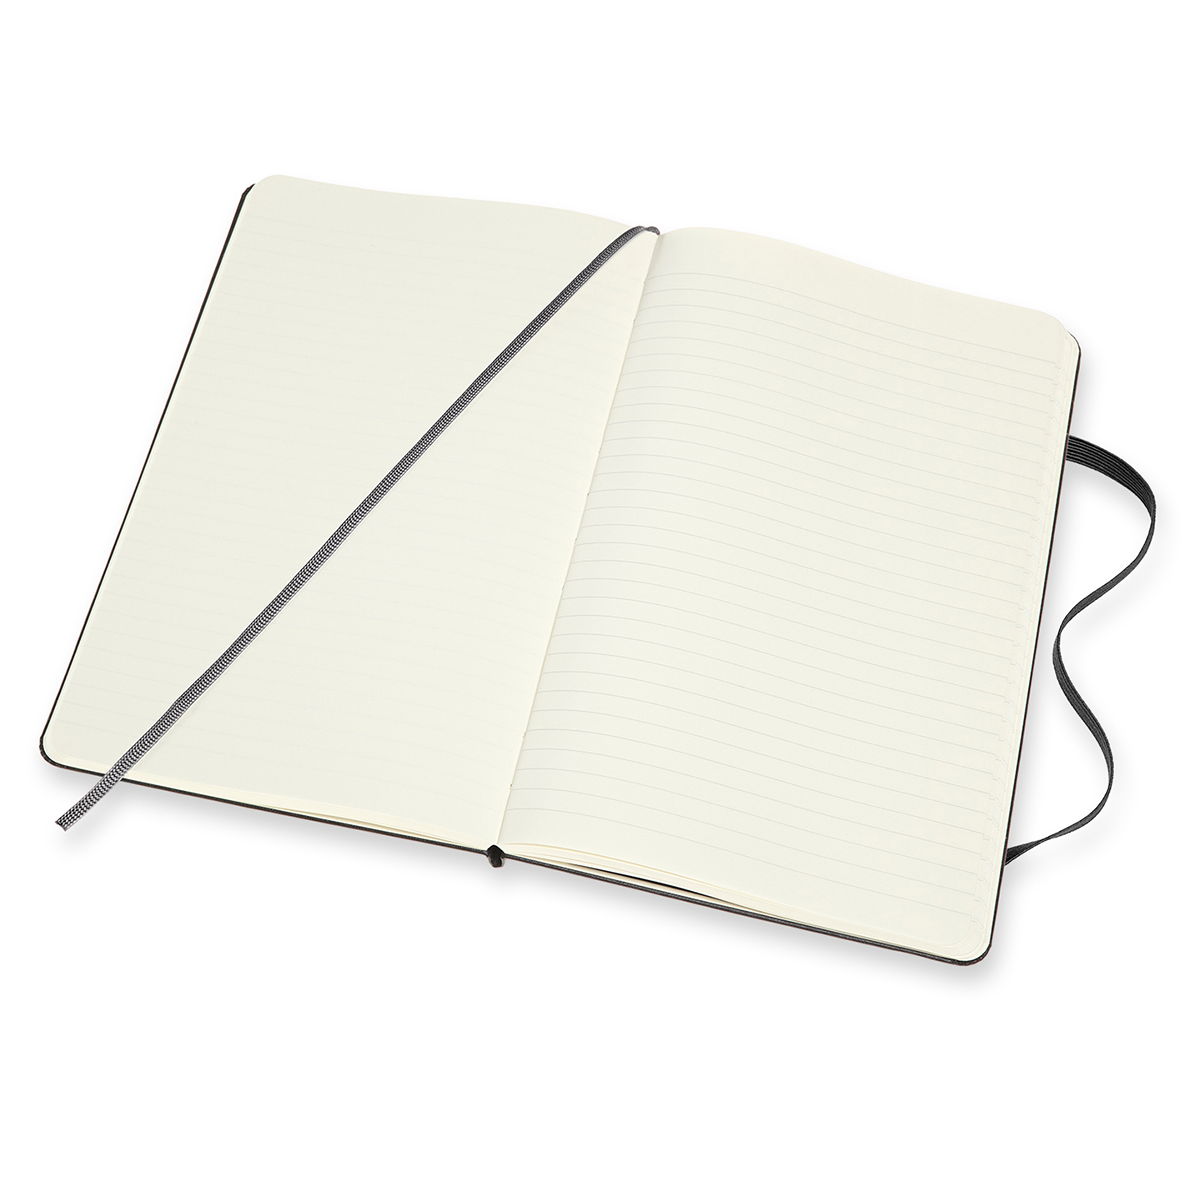 Classic Soft Cover Double Layout Large Black in the group Paper & Pads / Note & Memo / Notebooks & Journals at Pen Store (126743)